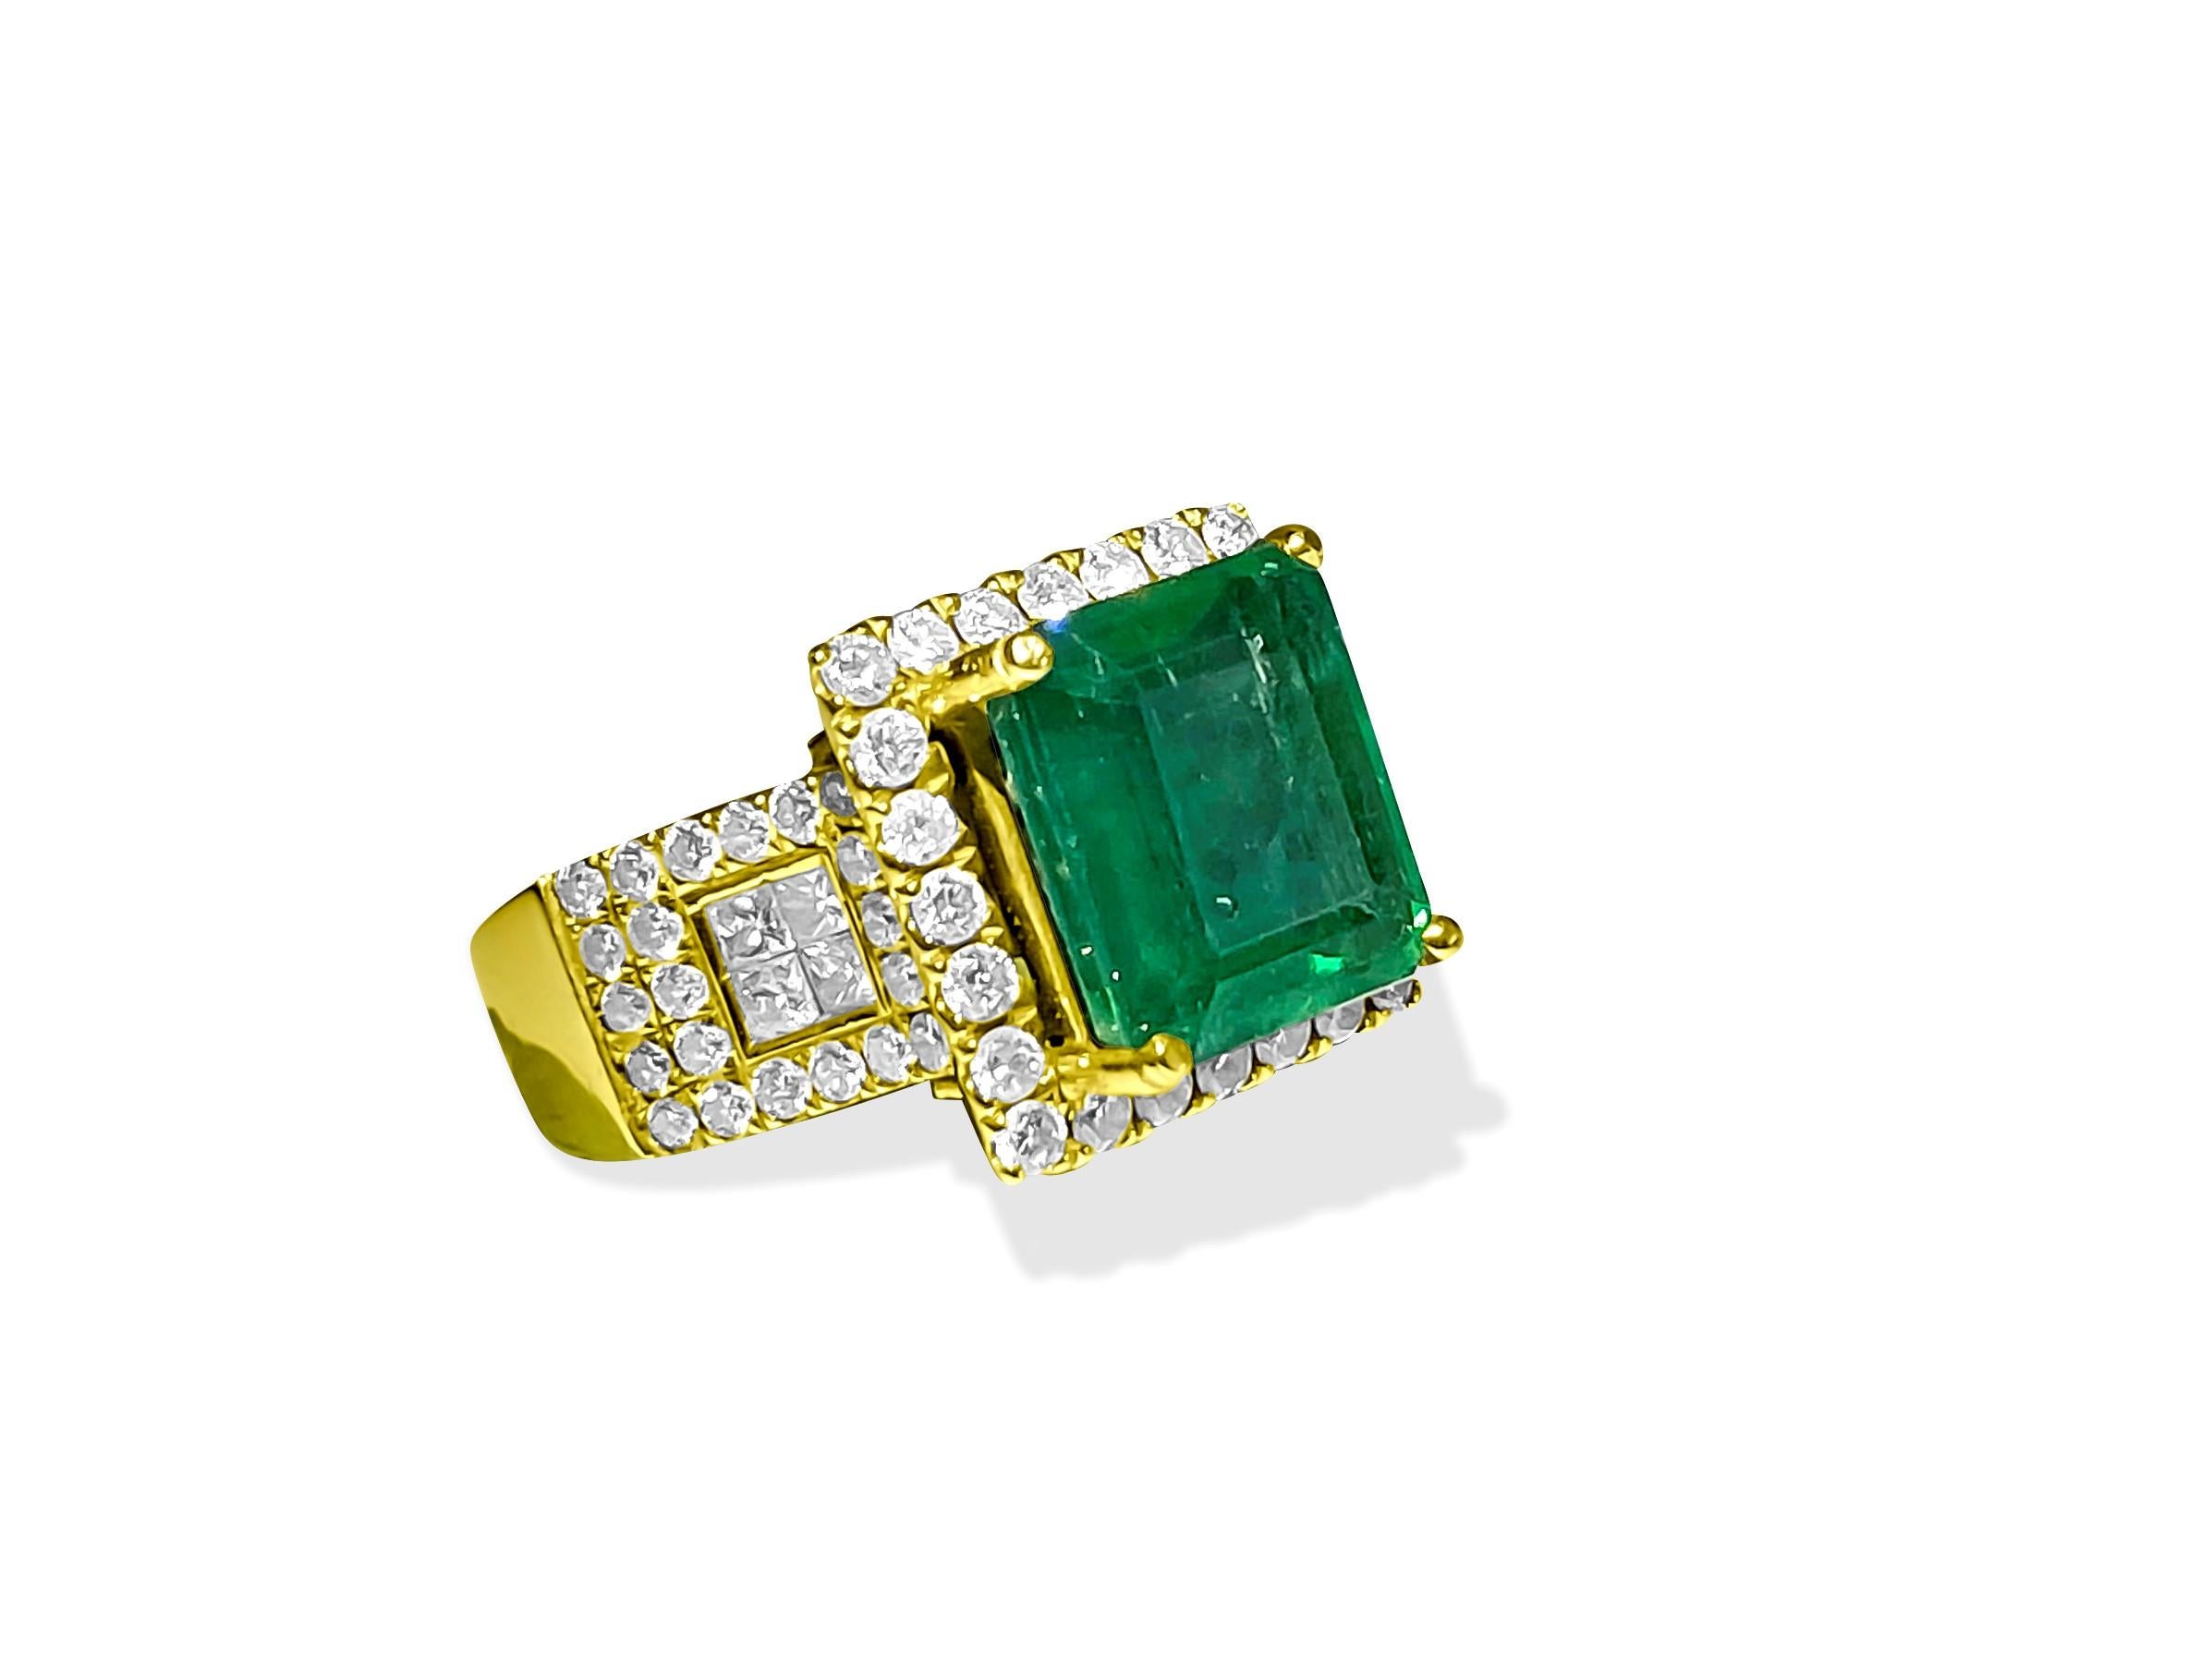 A pretty ring made of 14-karat yellow gold with a 5.50-carat emerald and 2.00 carats of diamonds. The emerald and diamonds are real and mined from the earth, with the diamonds being clear and colorless. The ring is stunning and can be resized.

Key